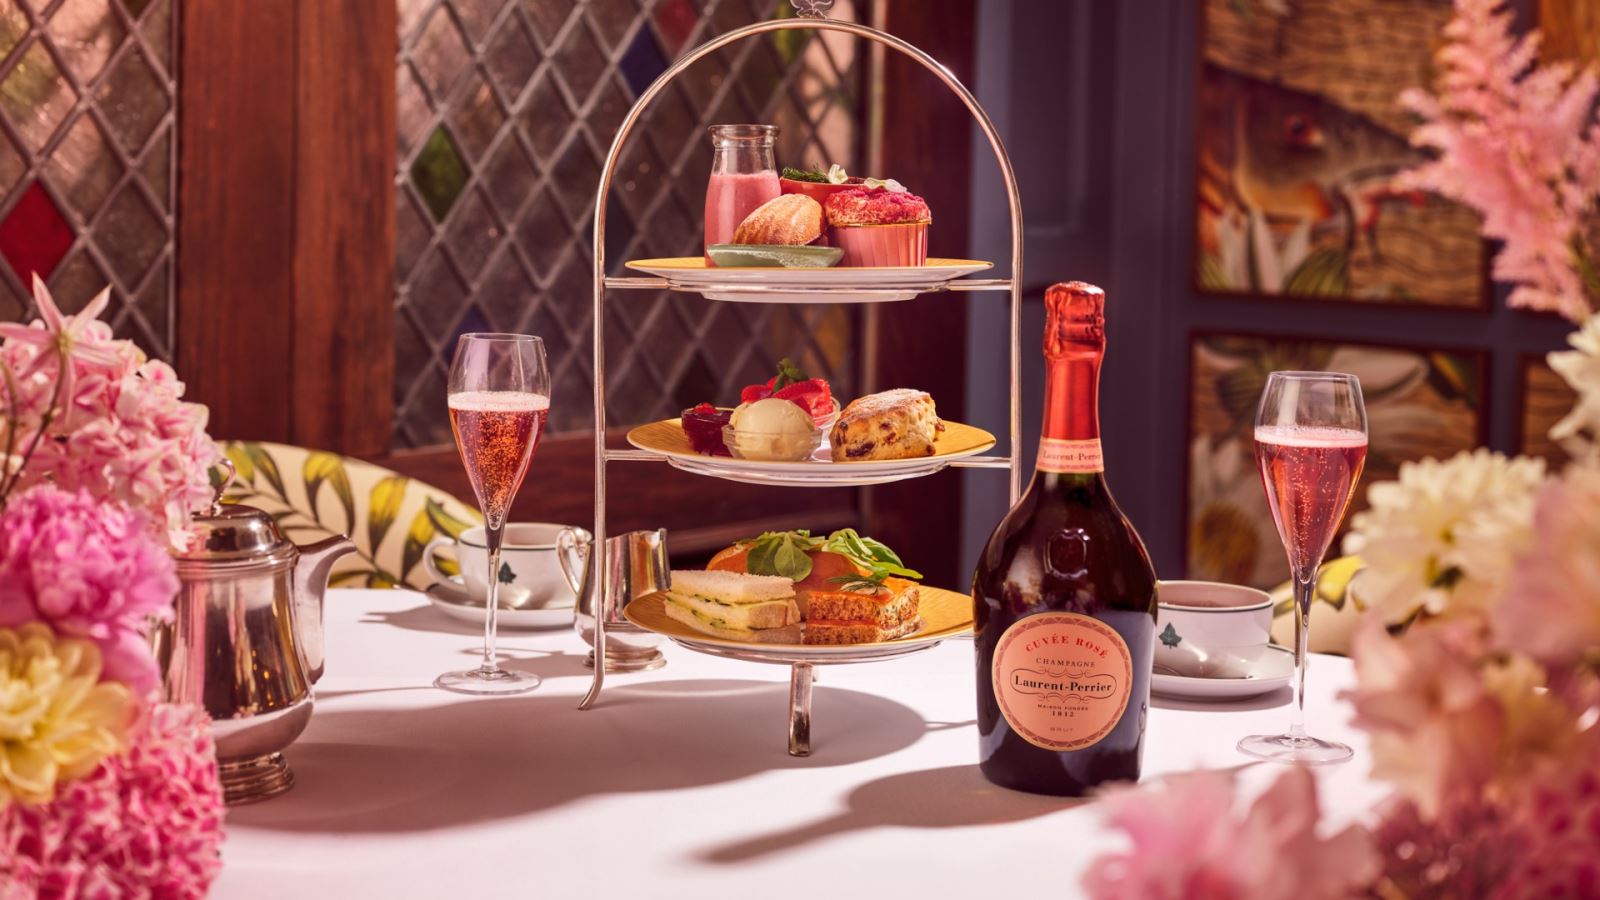 New Laurent Perrier Summer Afternoon Tea at The Ivy Clifton Brasserie this August